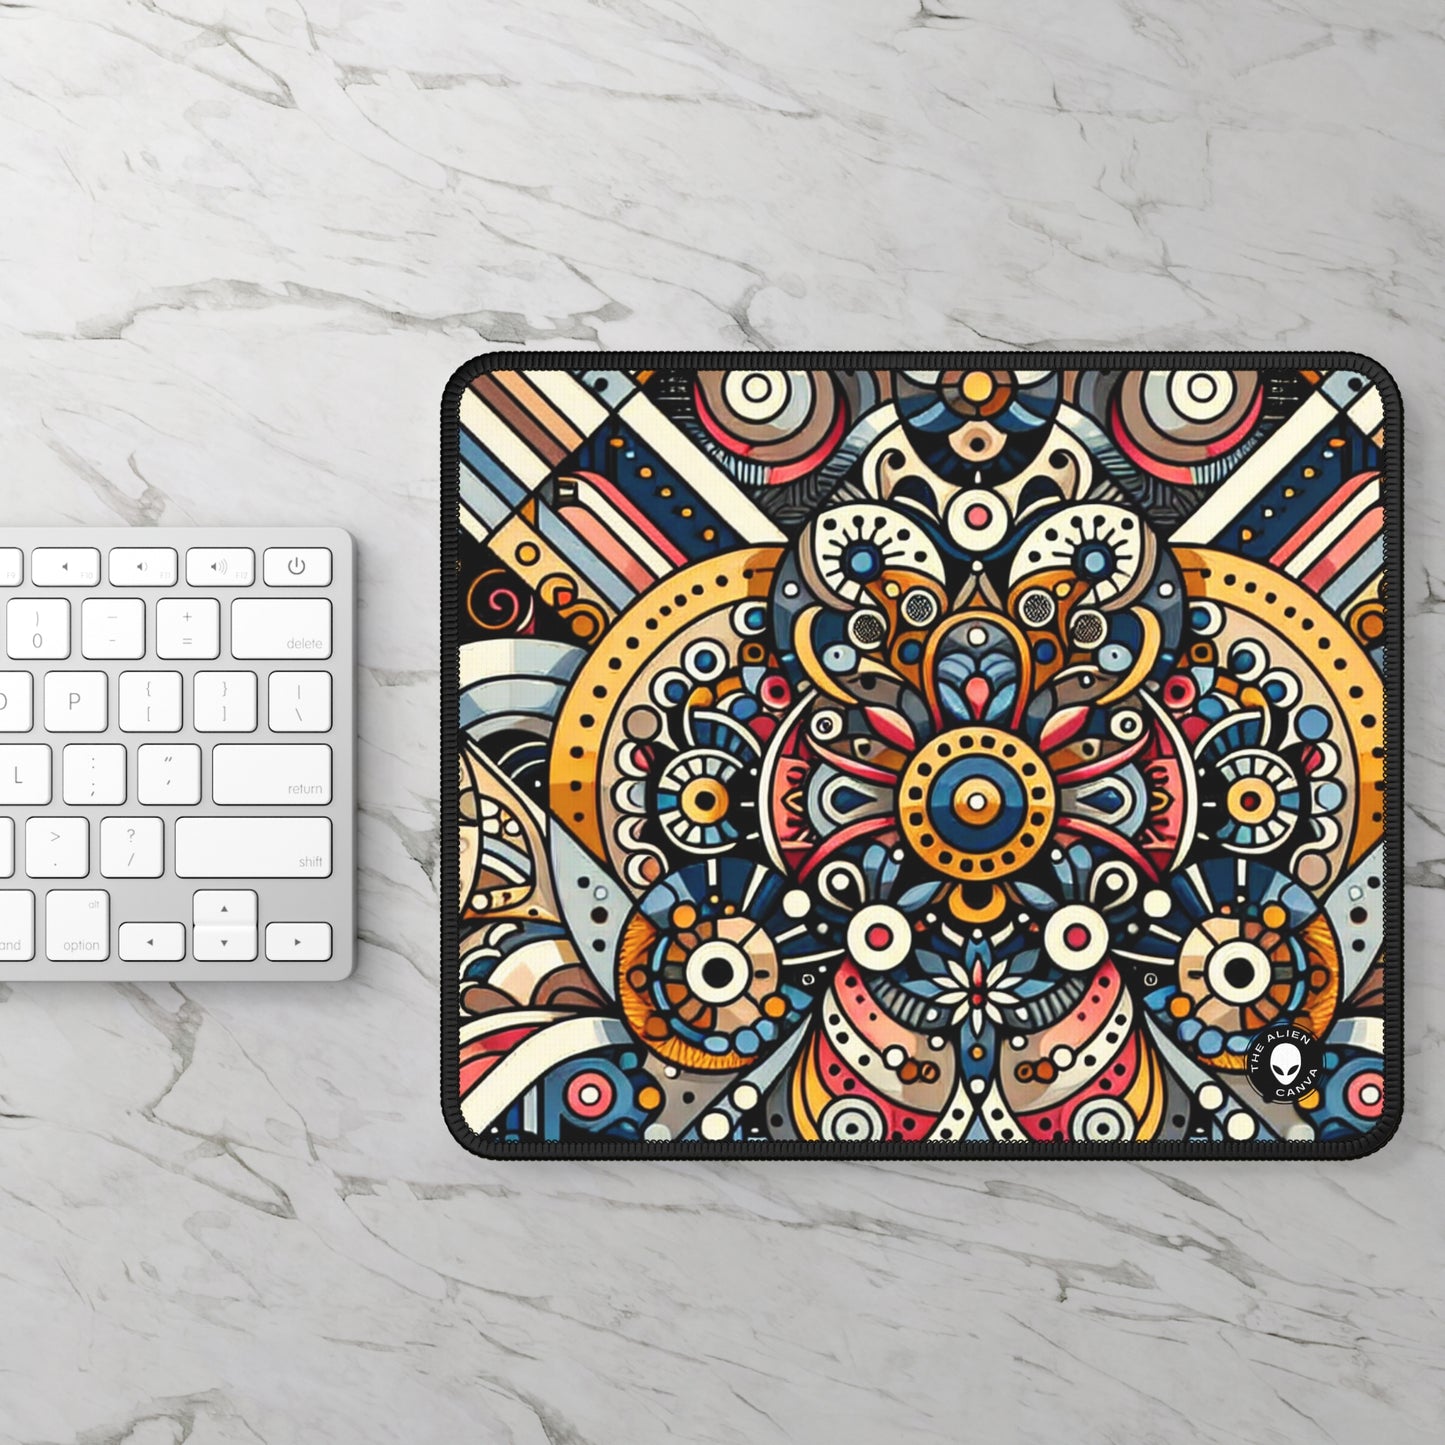 "Moroccan Mosaic Masterpiece" - The Alien Gaming Mouse Pad Pattern Art